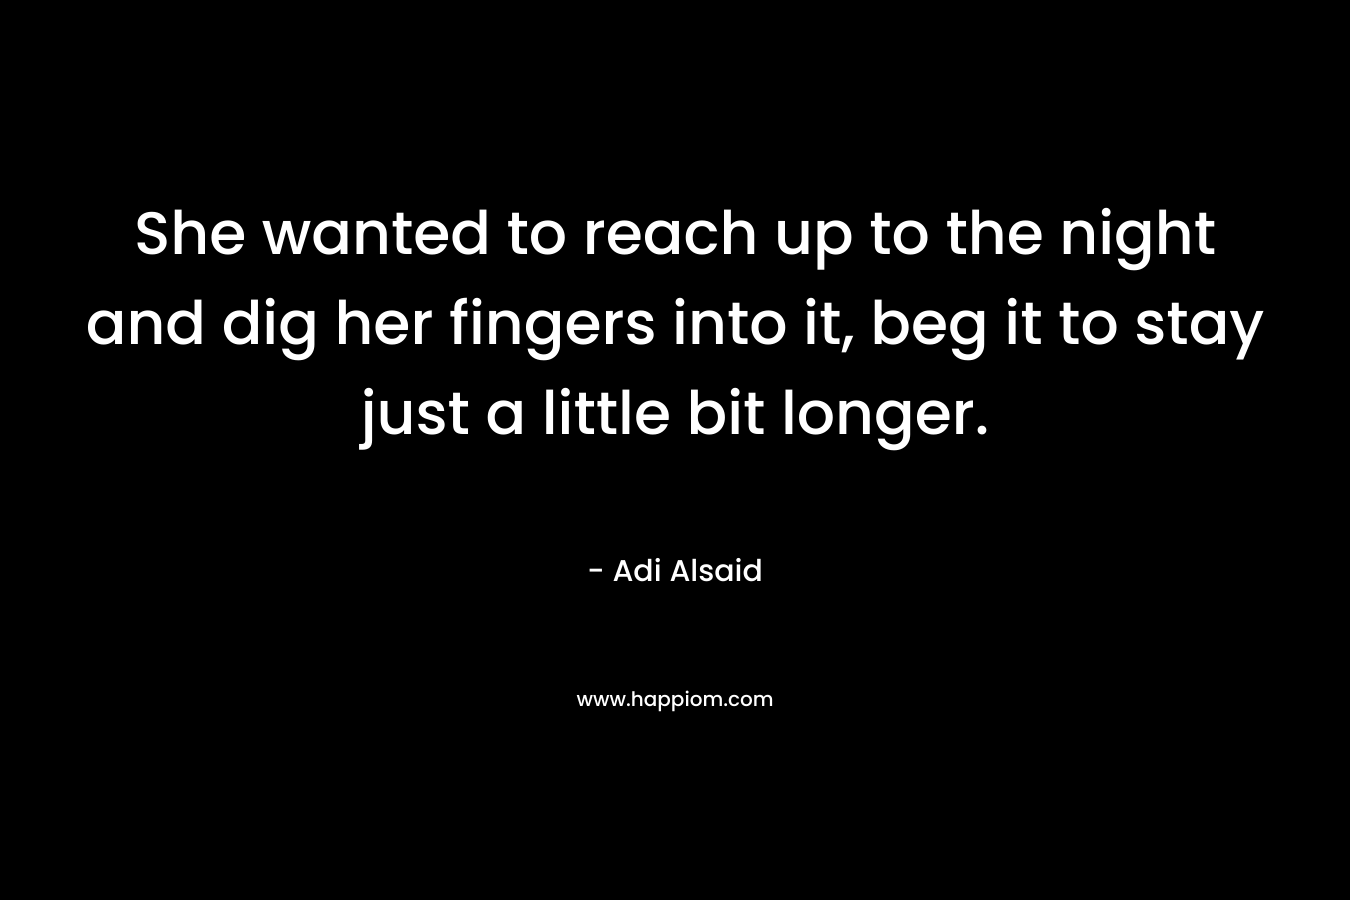 She wanted to reach up to the night and dig her fingers into it, beg it to stay just a little bit longer.